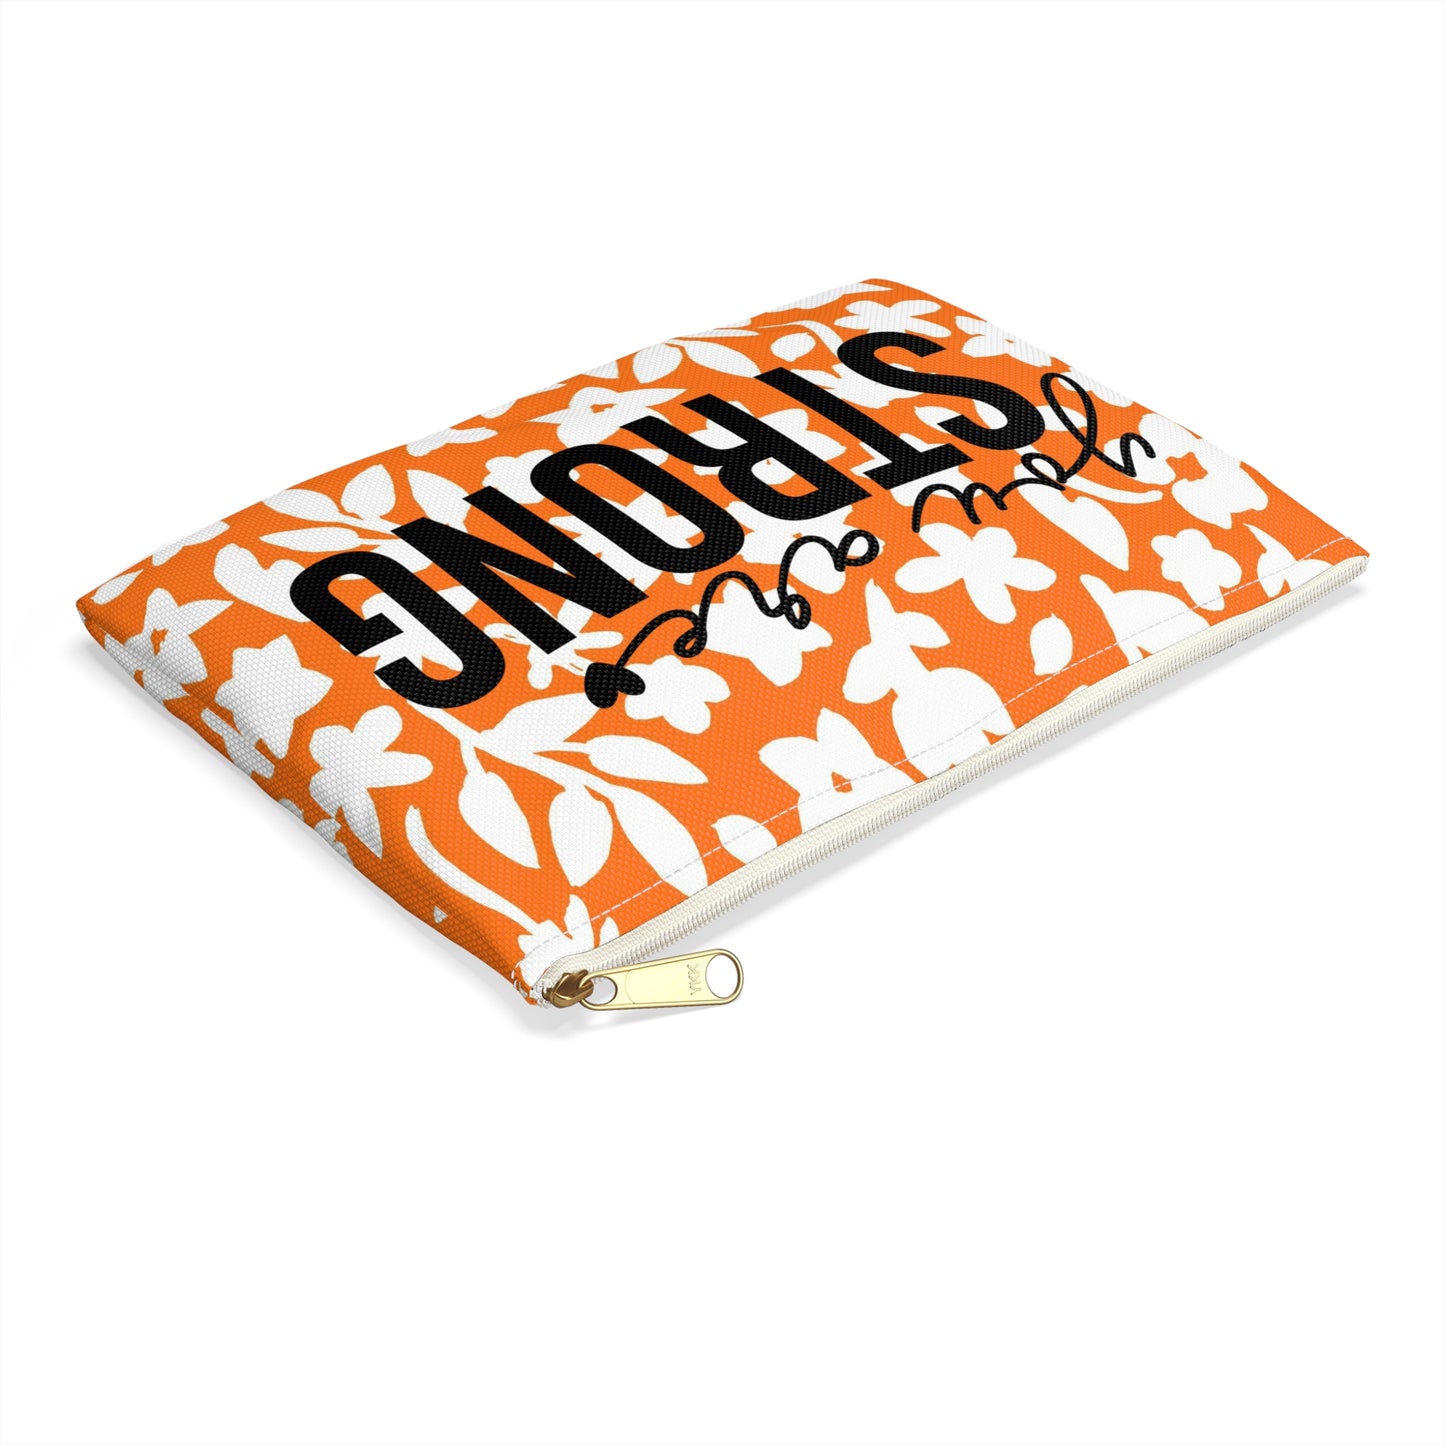 Orange with White Flowers - You are Strong - Inspirational -  Accessory Pouch / Makeup Case / Travel Pouch / Pencil Case / Art Case